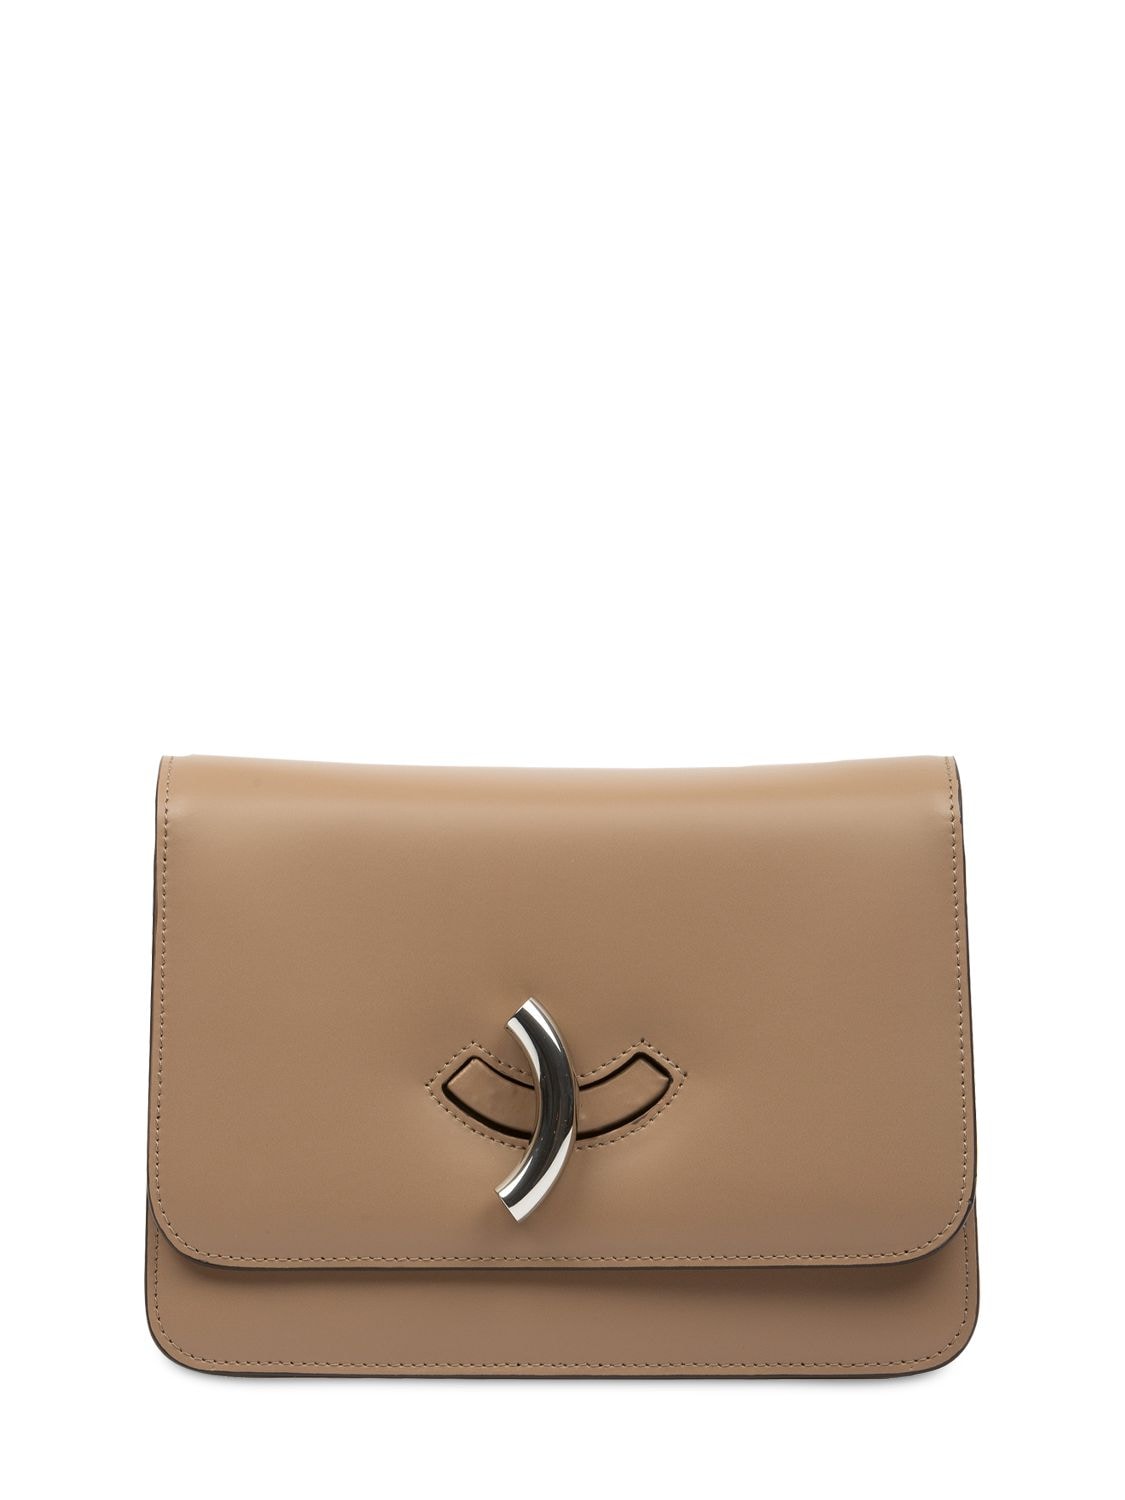 Little Liffner Maccheroni Leather Bag In Taupe